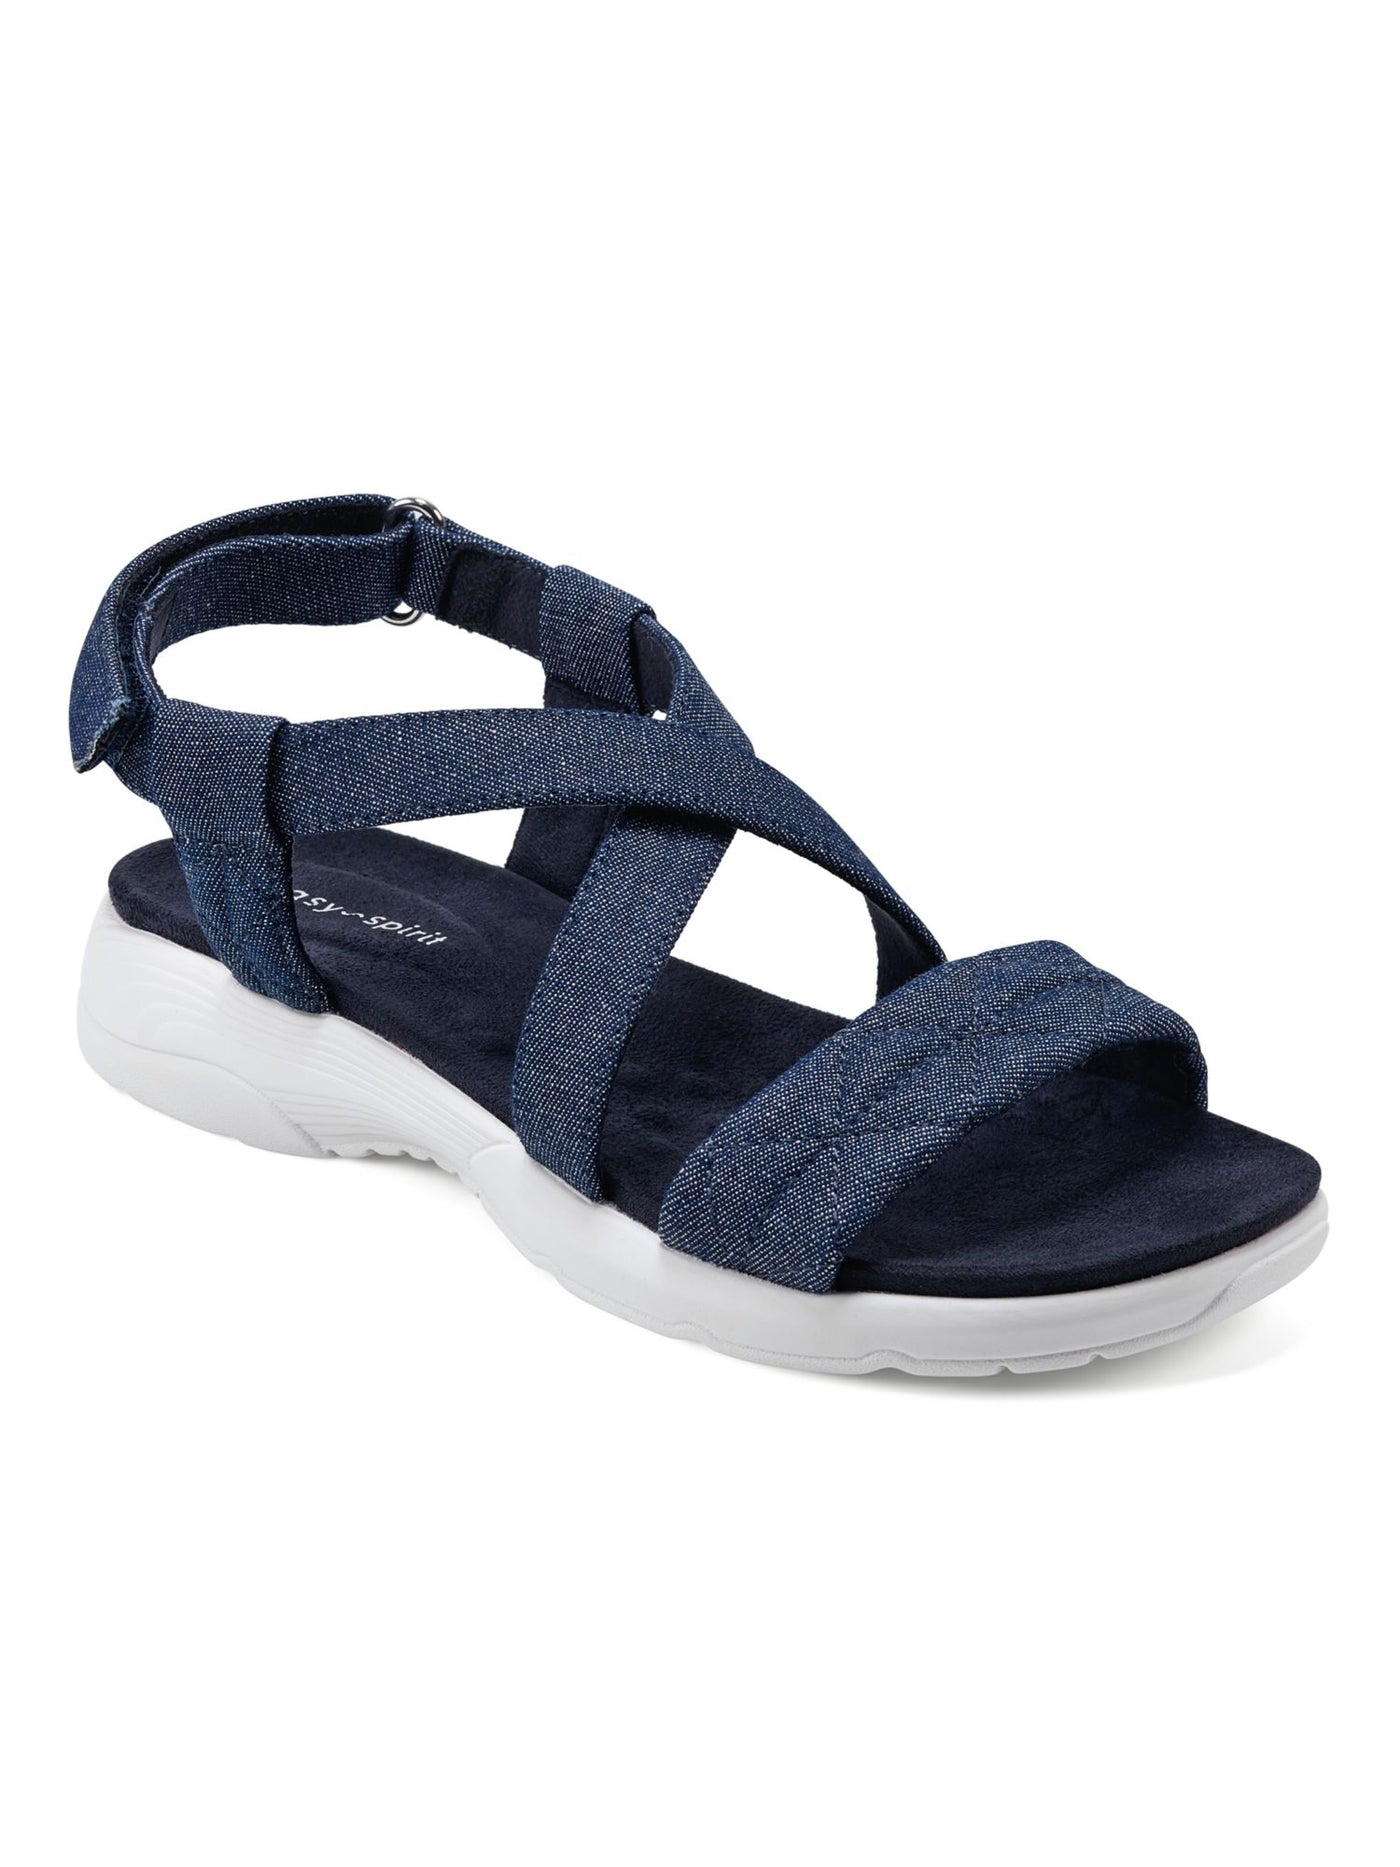 EASY SPIRIT Womens Navy Flexible Sole Cushioned Treasur Open Toe Wedge Sandals Shoes 8 M